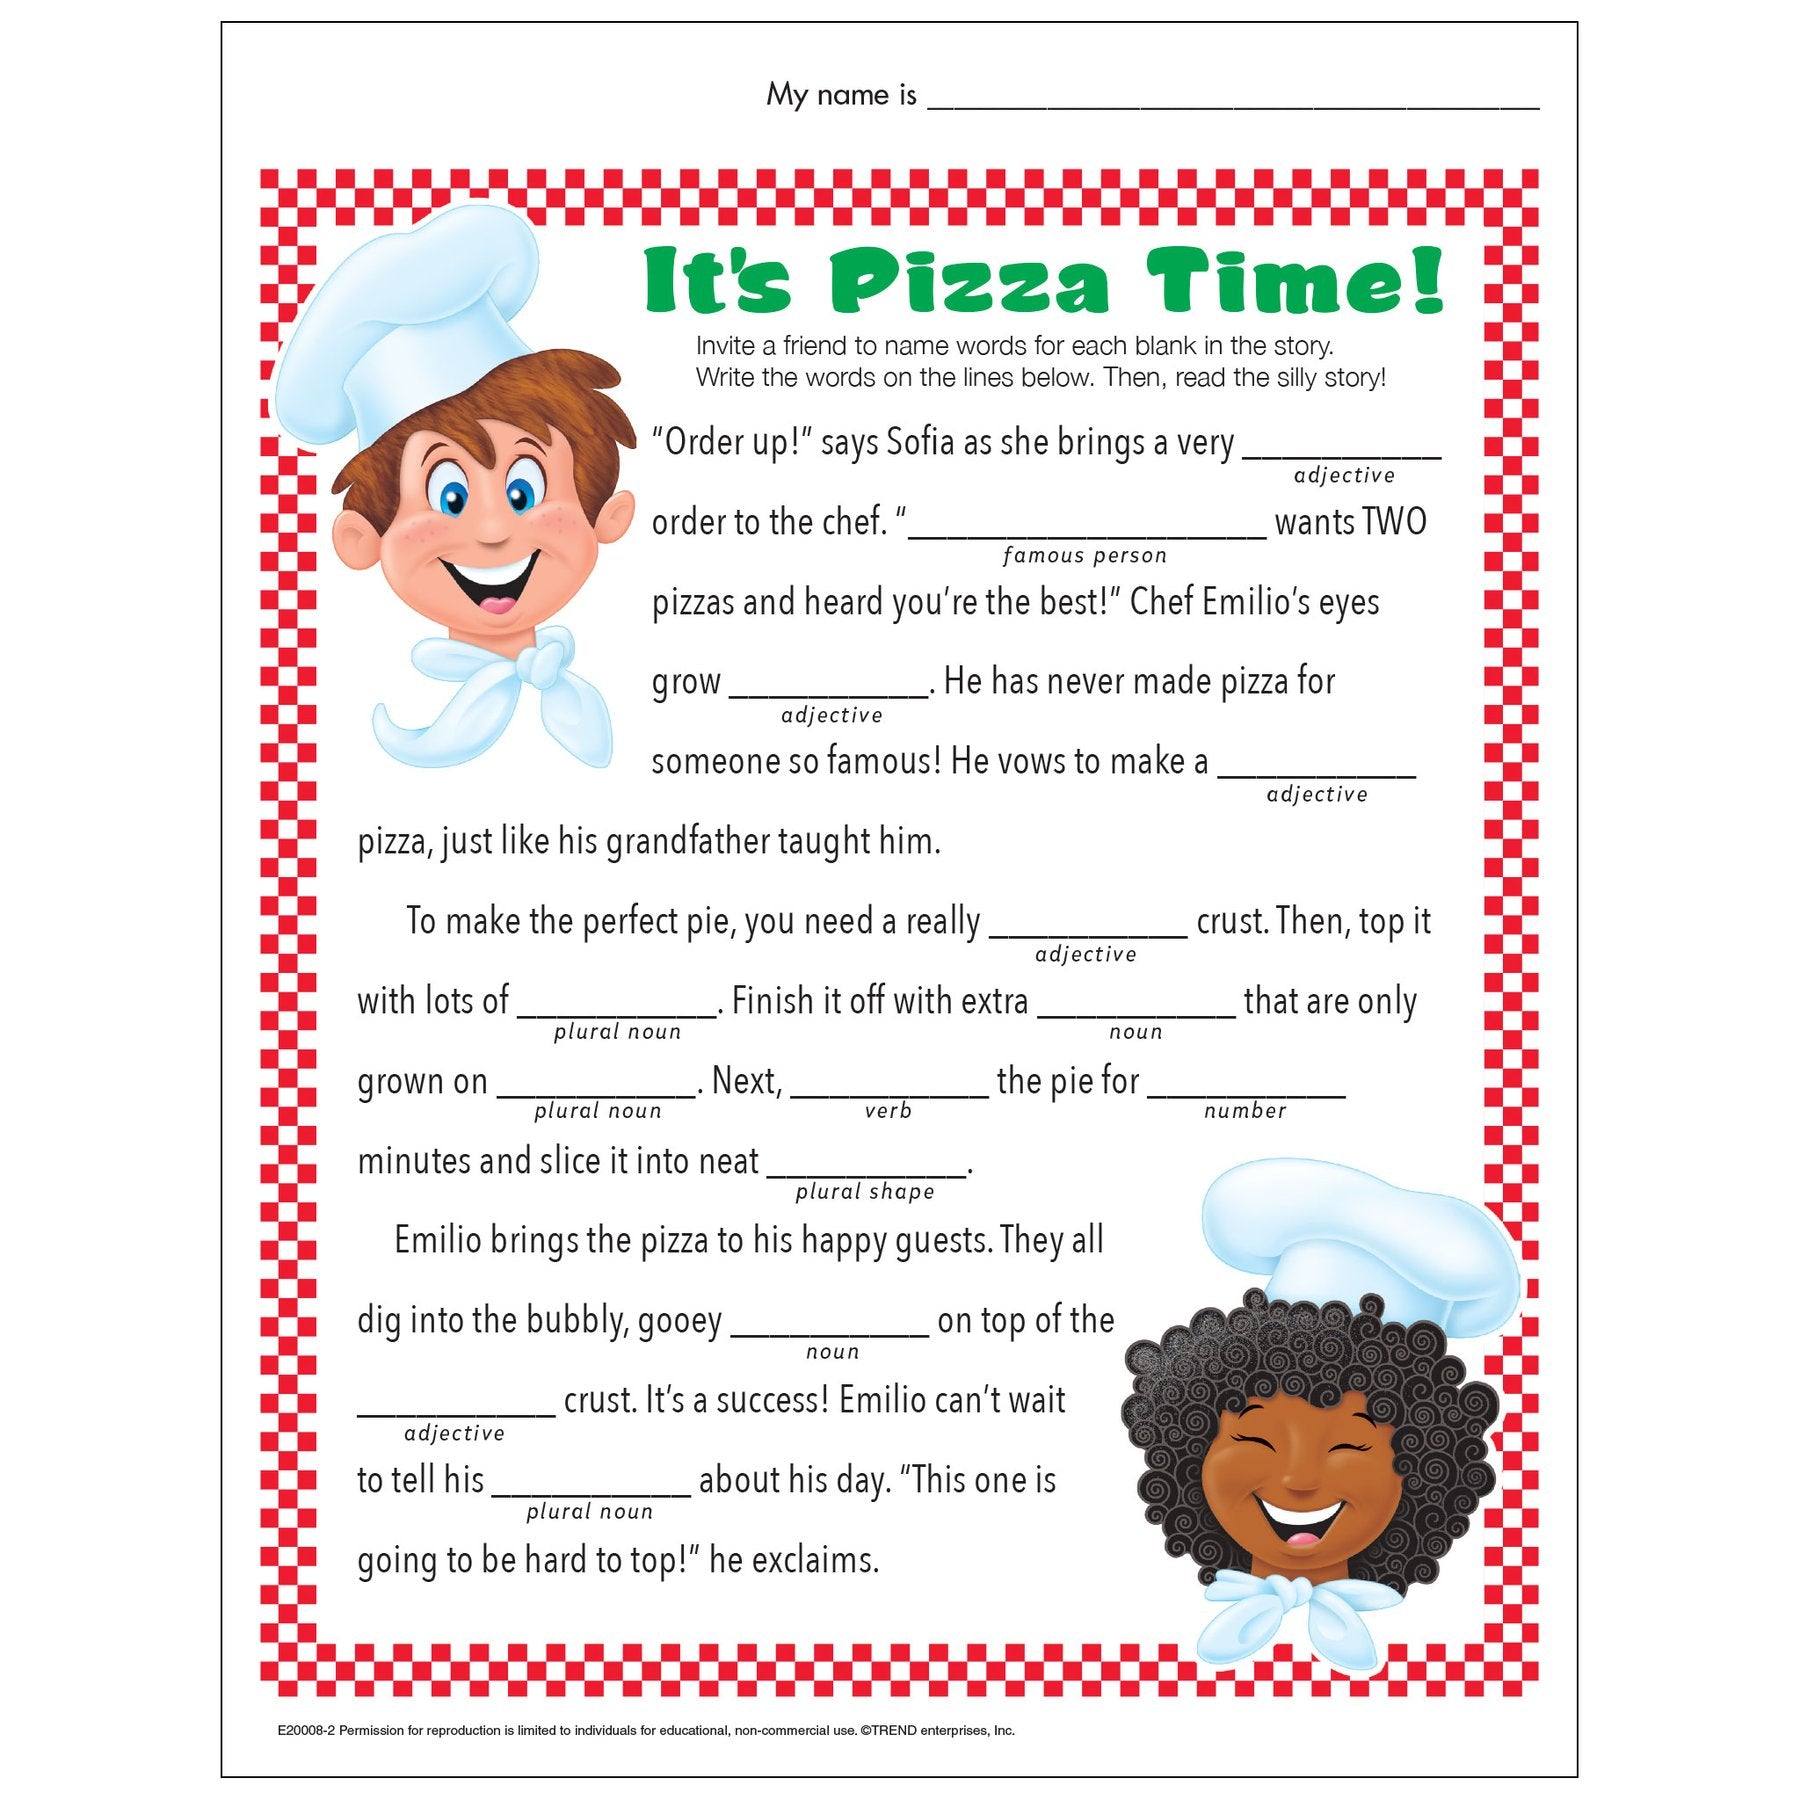 Pizza Time Silly Story Fill-in-the-blank free worksheet